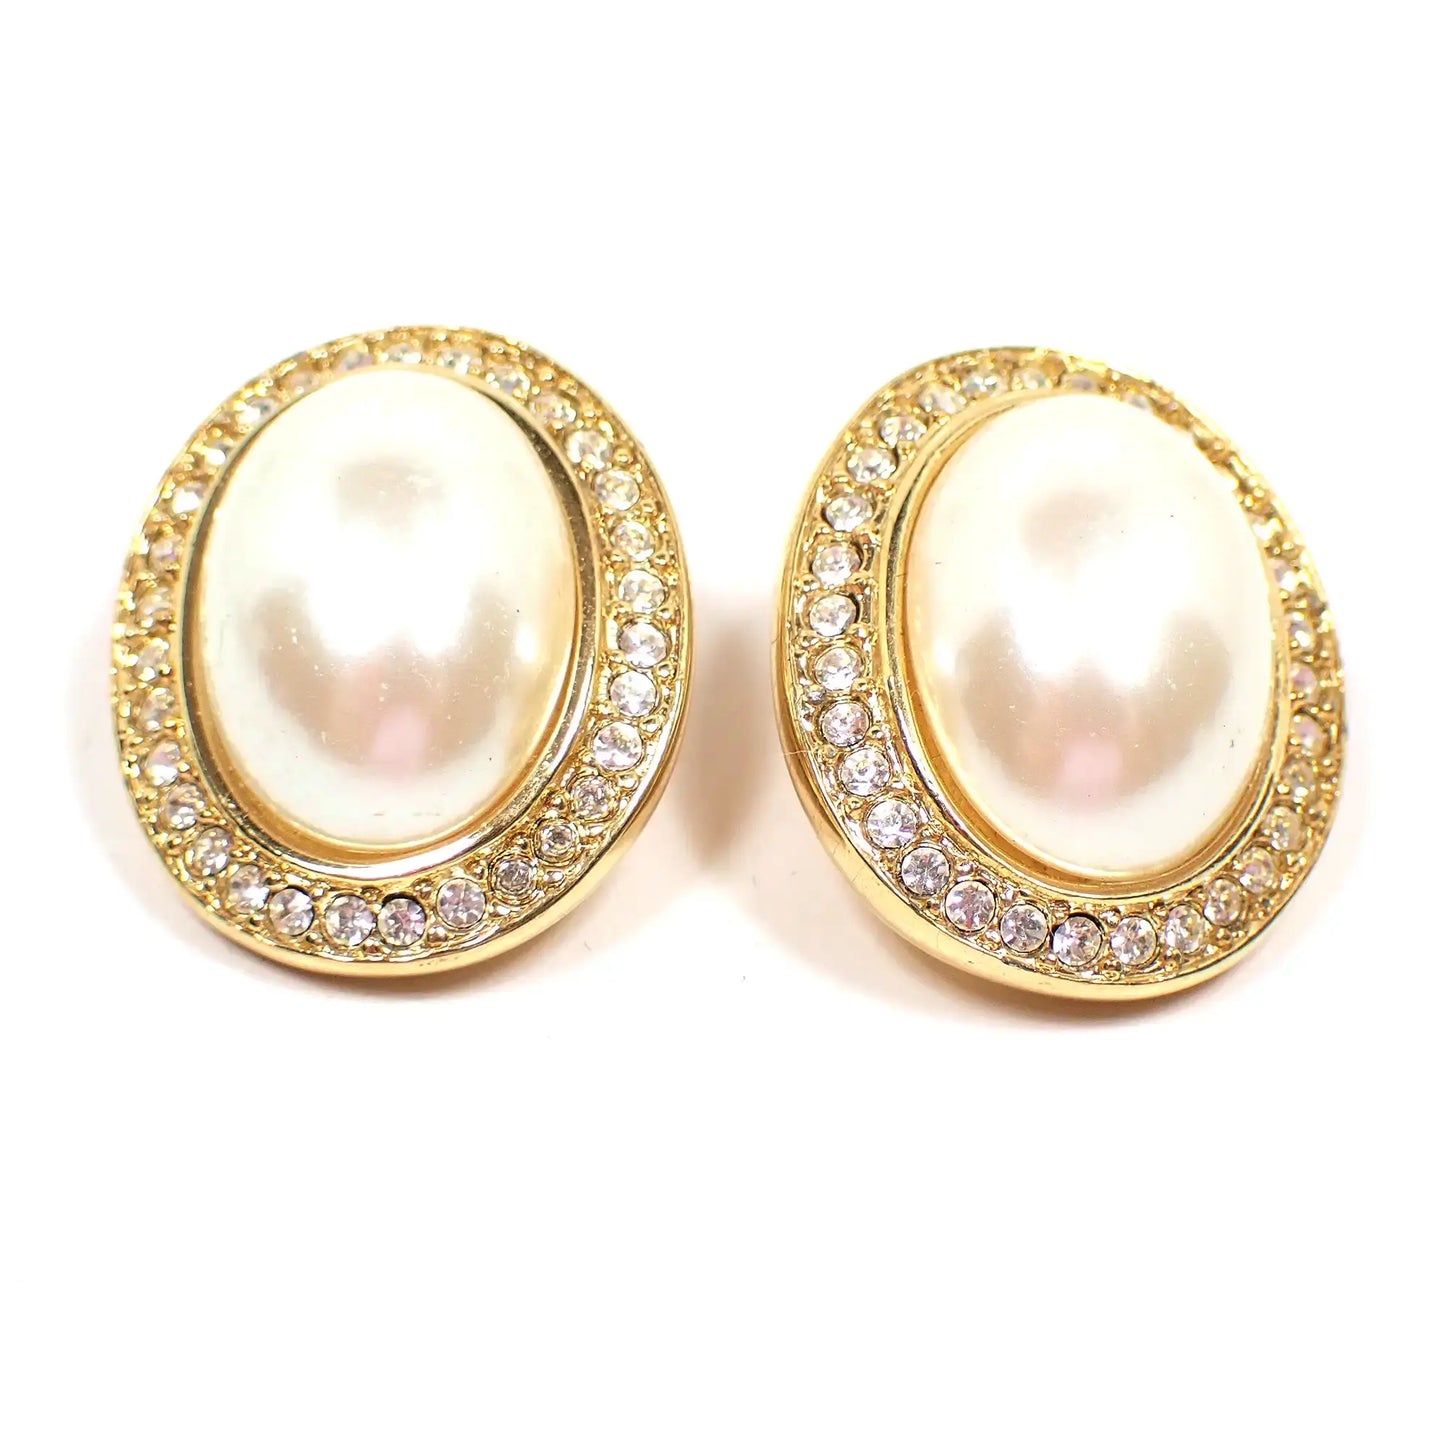 Marvella Faux Pearl and Rhinestone Oval Vintage Clip on Earrings